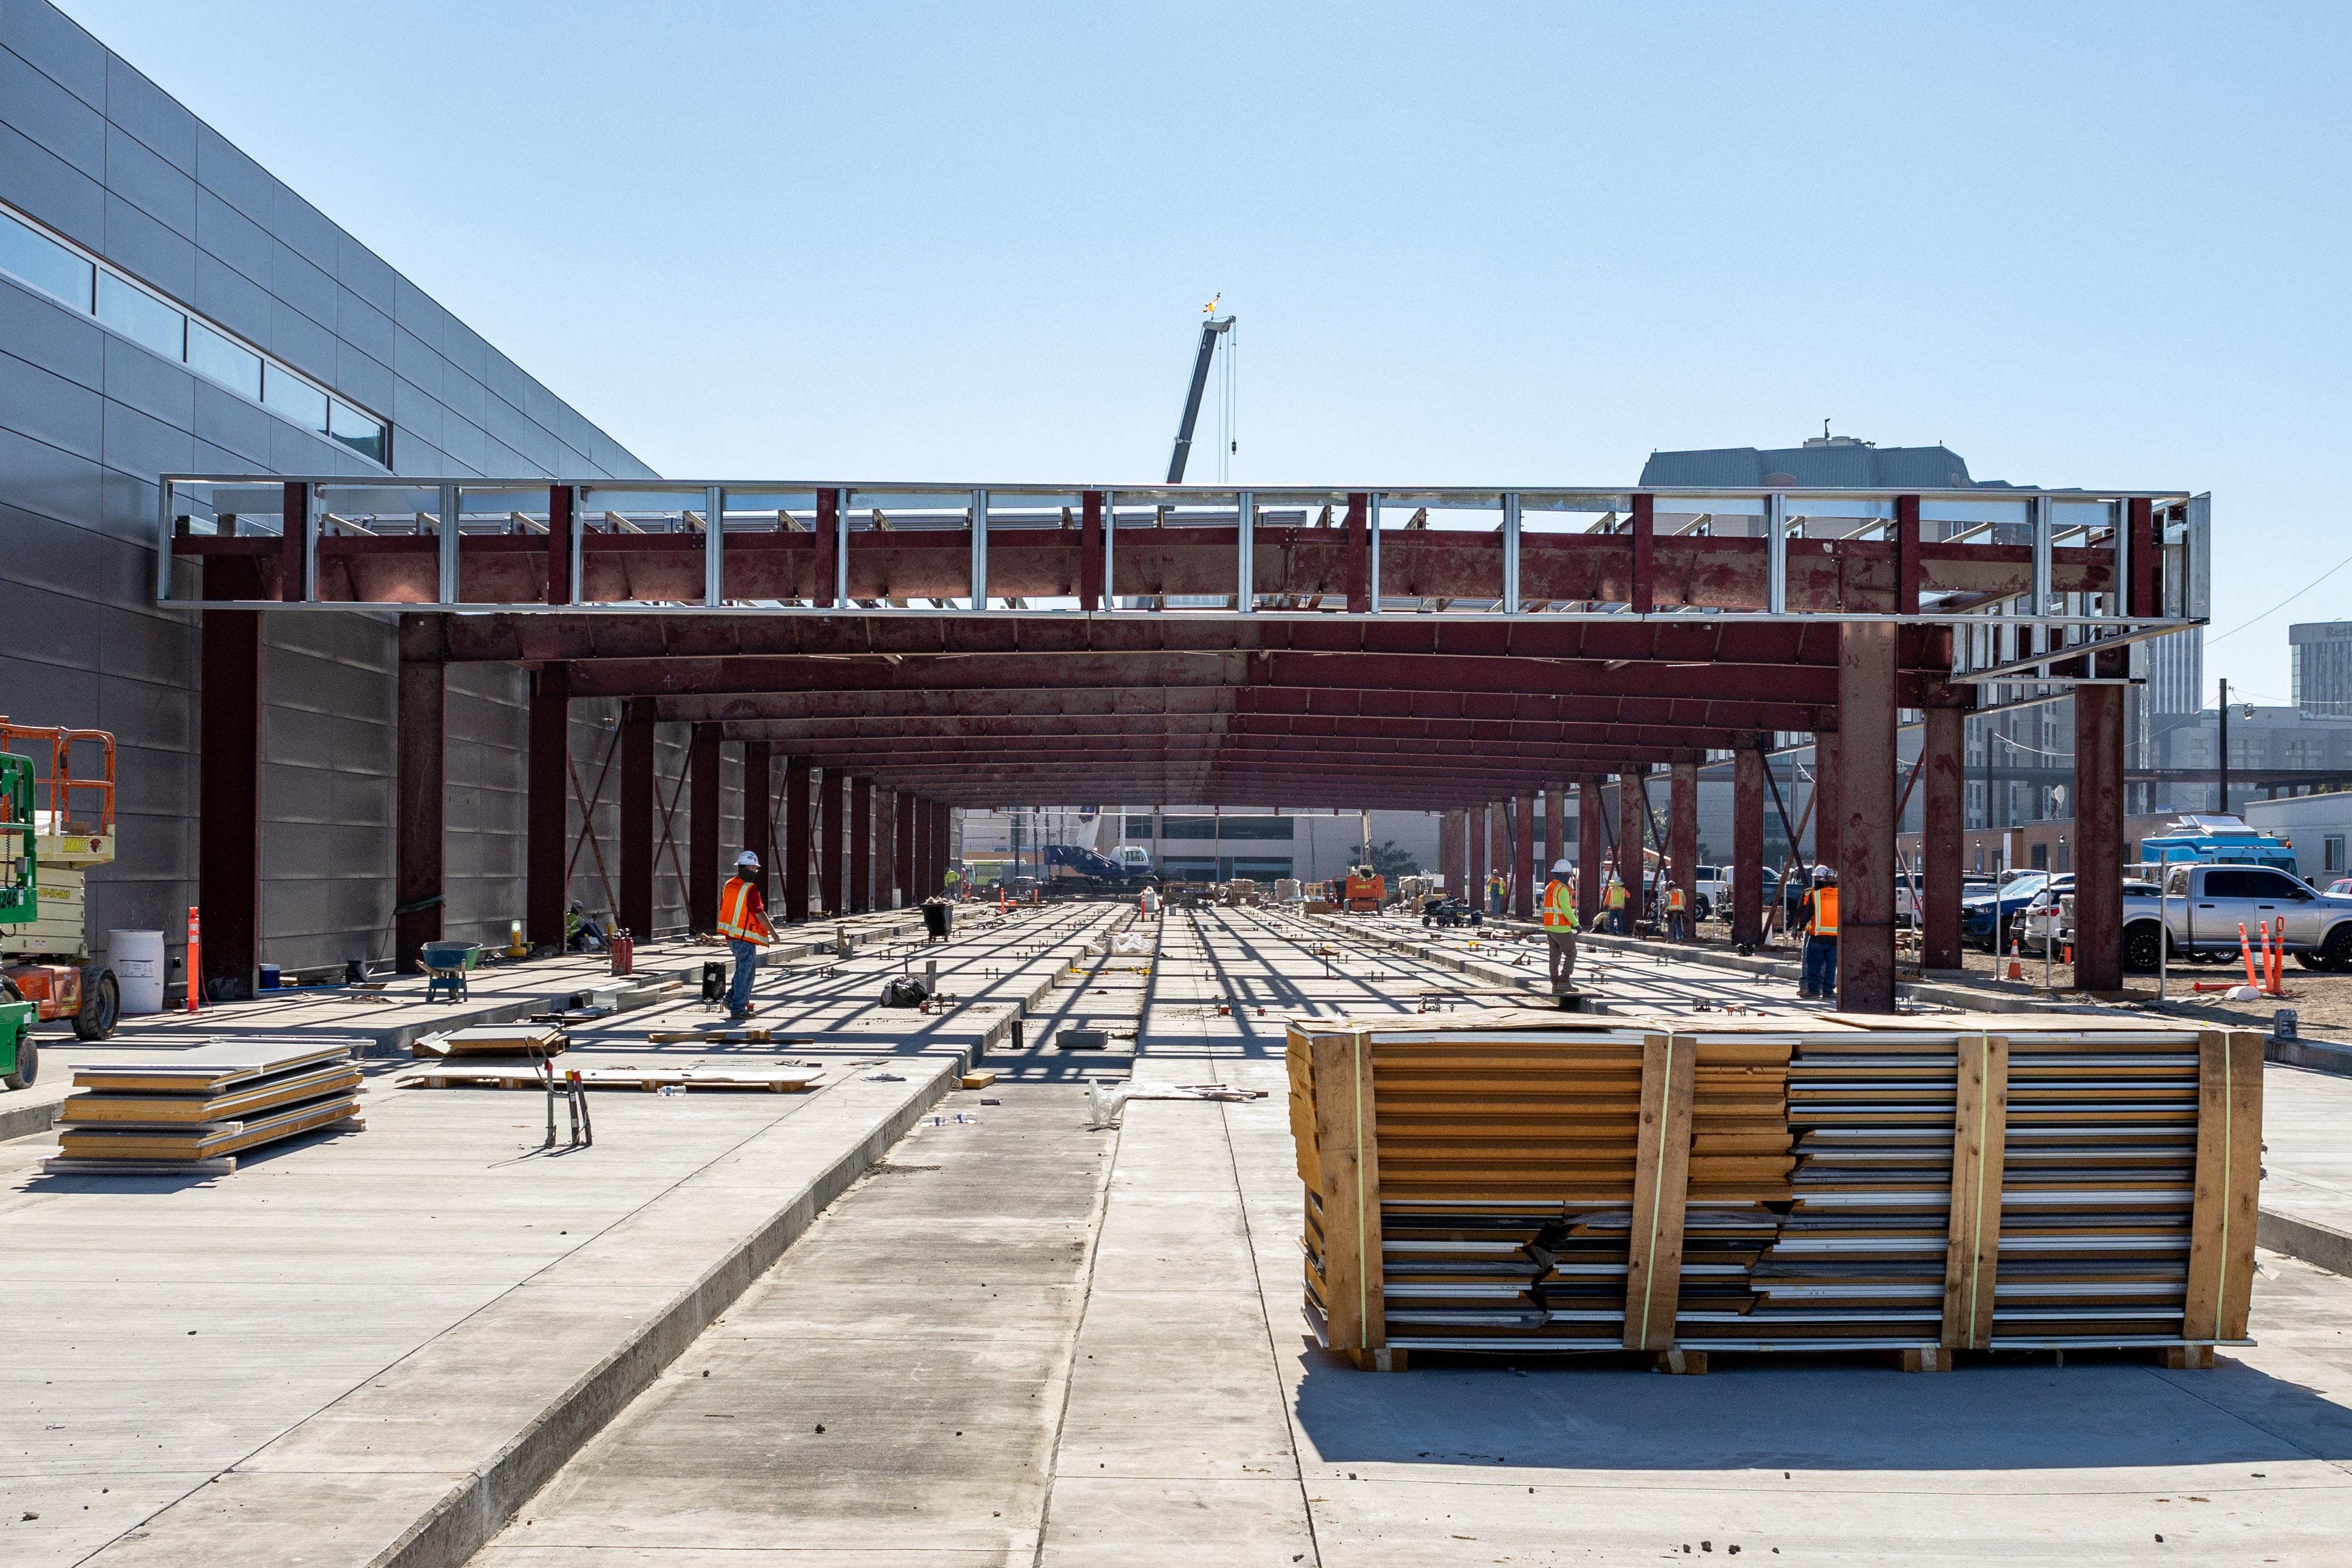 At the future Maintenance and Storage Facility, concrete pours for the system's only at-grade tracks are now complete, with the installation of guiding elements to follow.